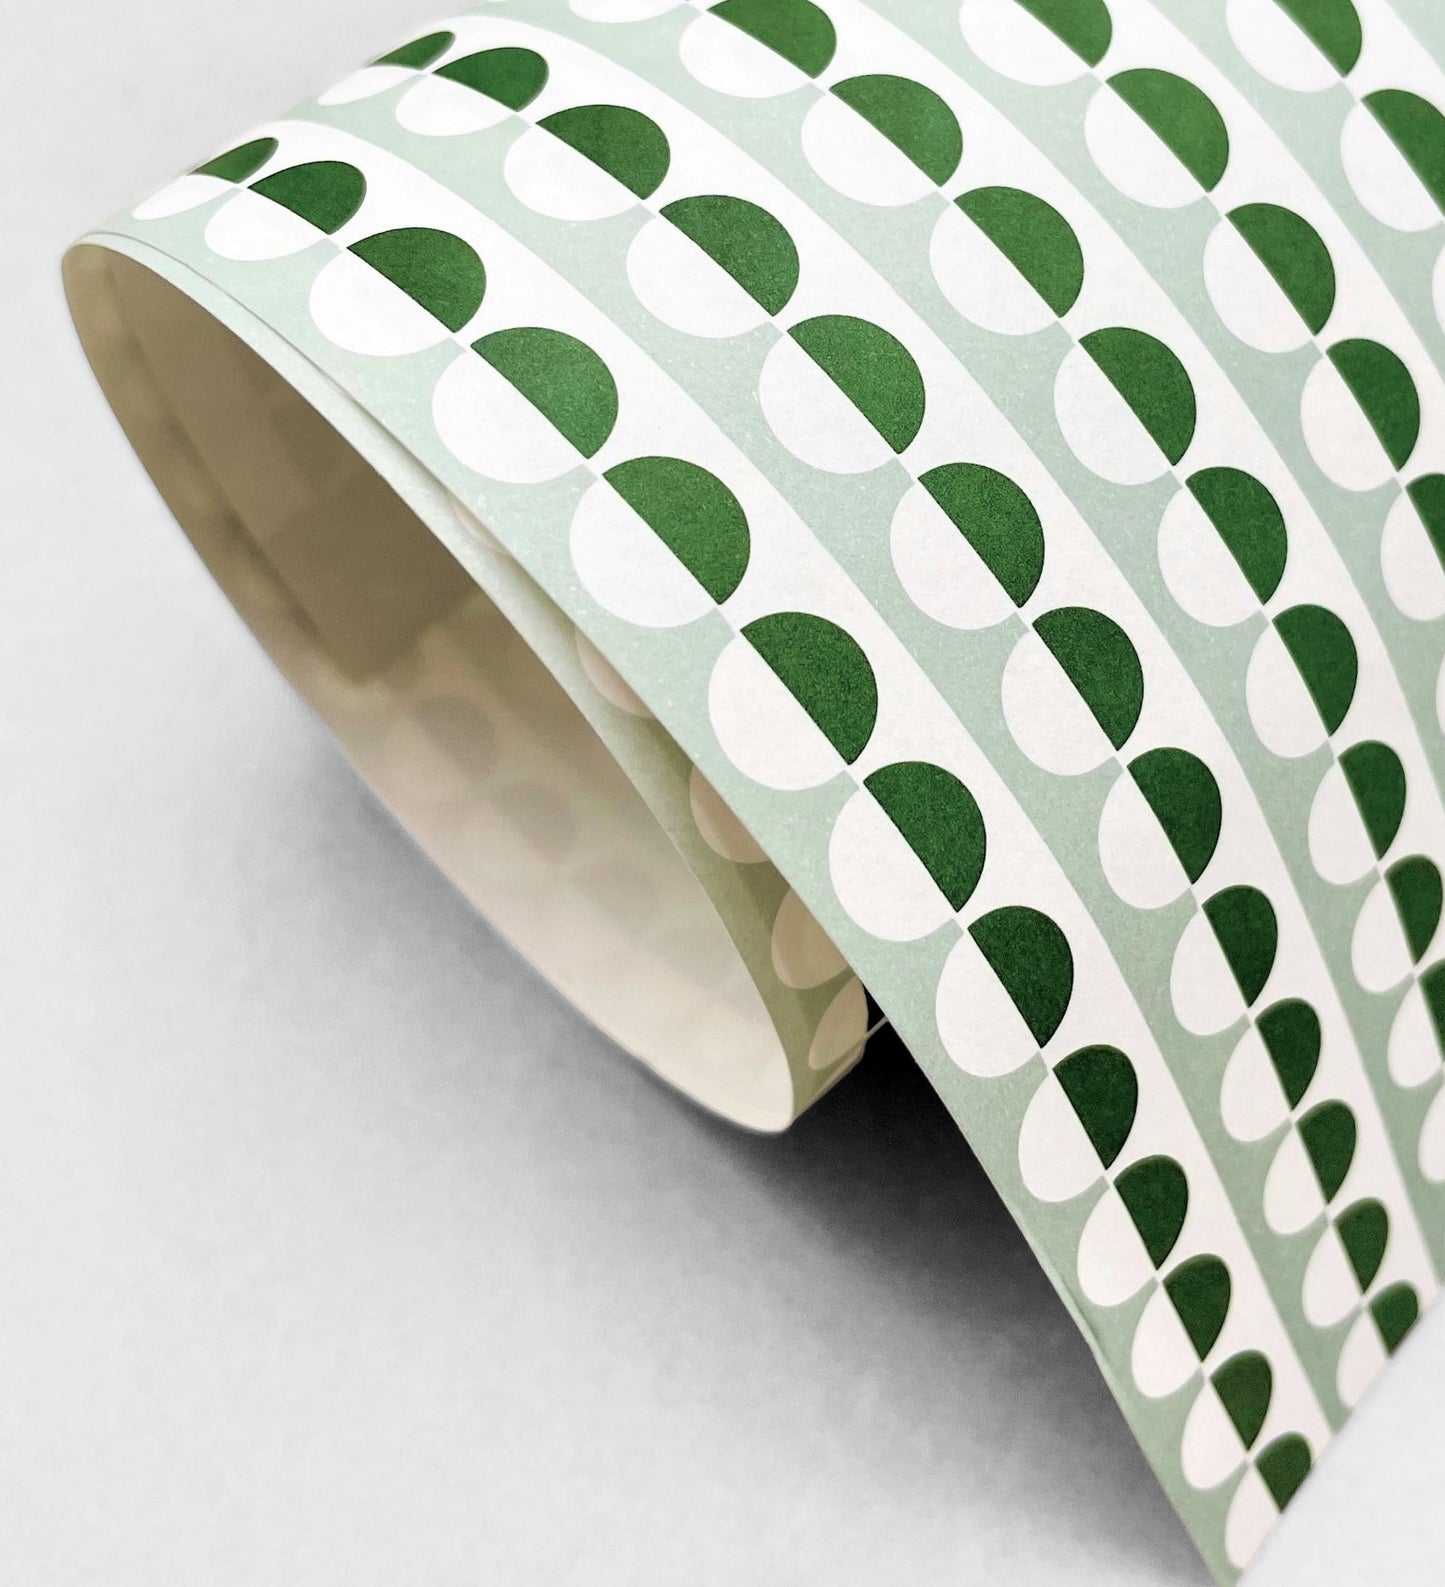 wrapping paper with an abstract circle pattern in dark green and pale green by Ola Studio